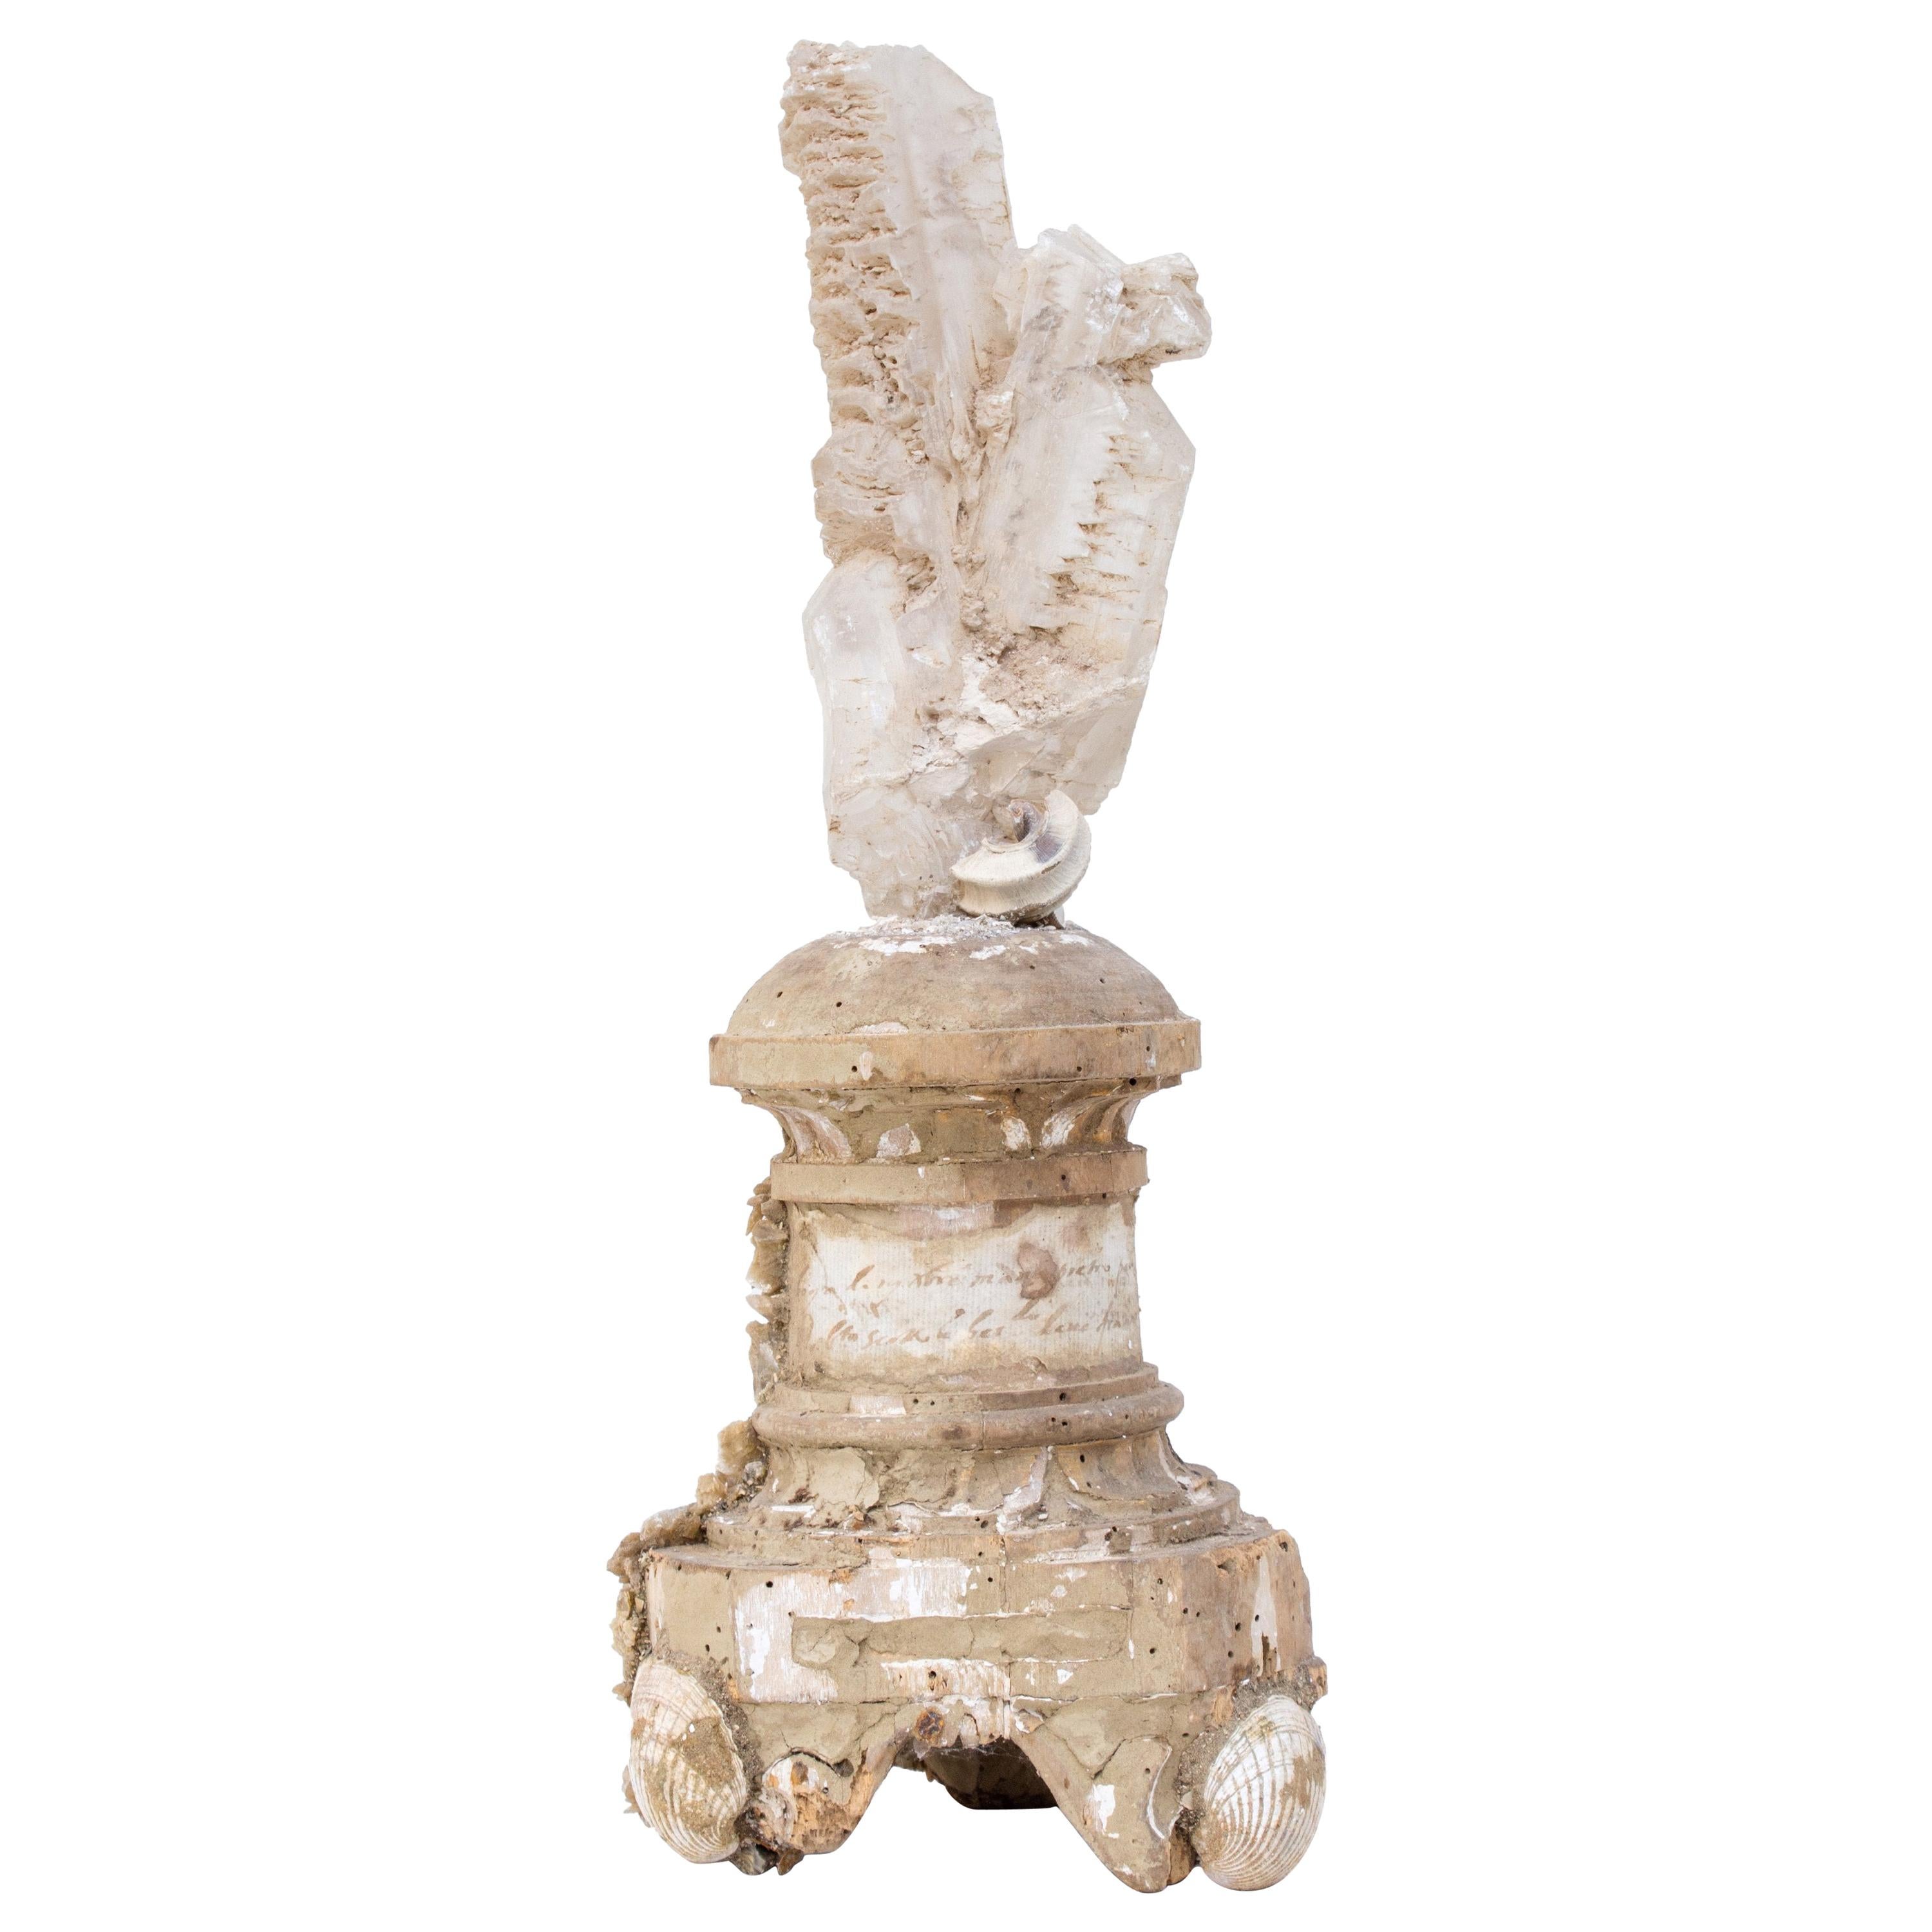 17th Century Italian Candlestick with a Selenite Blade Cluster and Fossil Shells